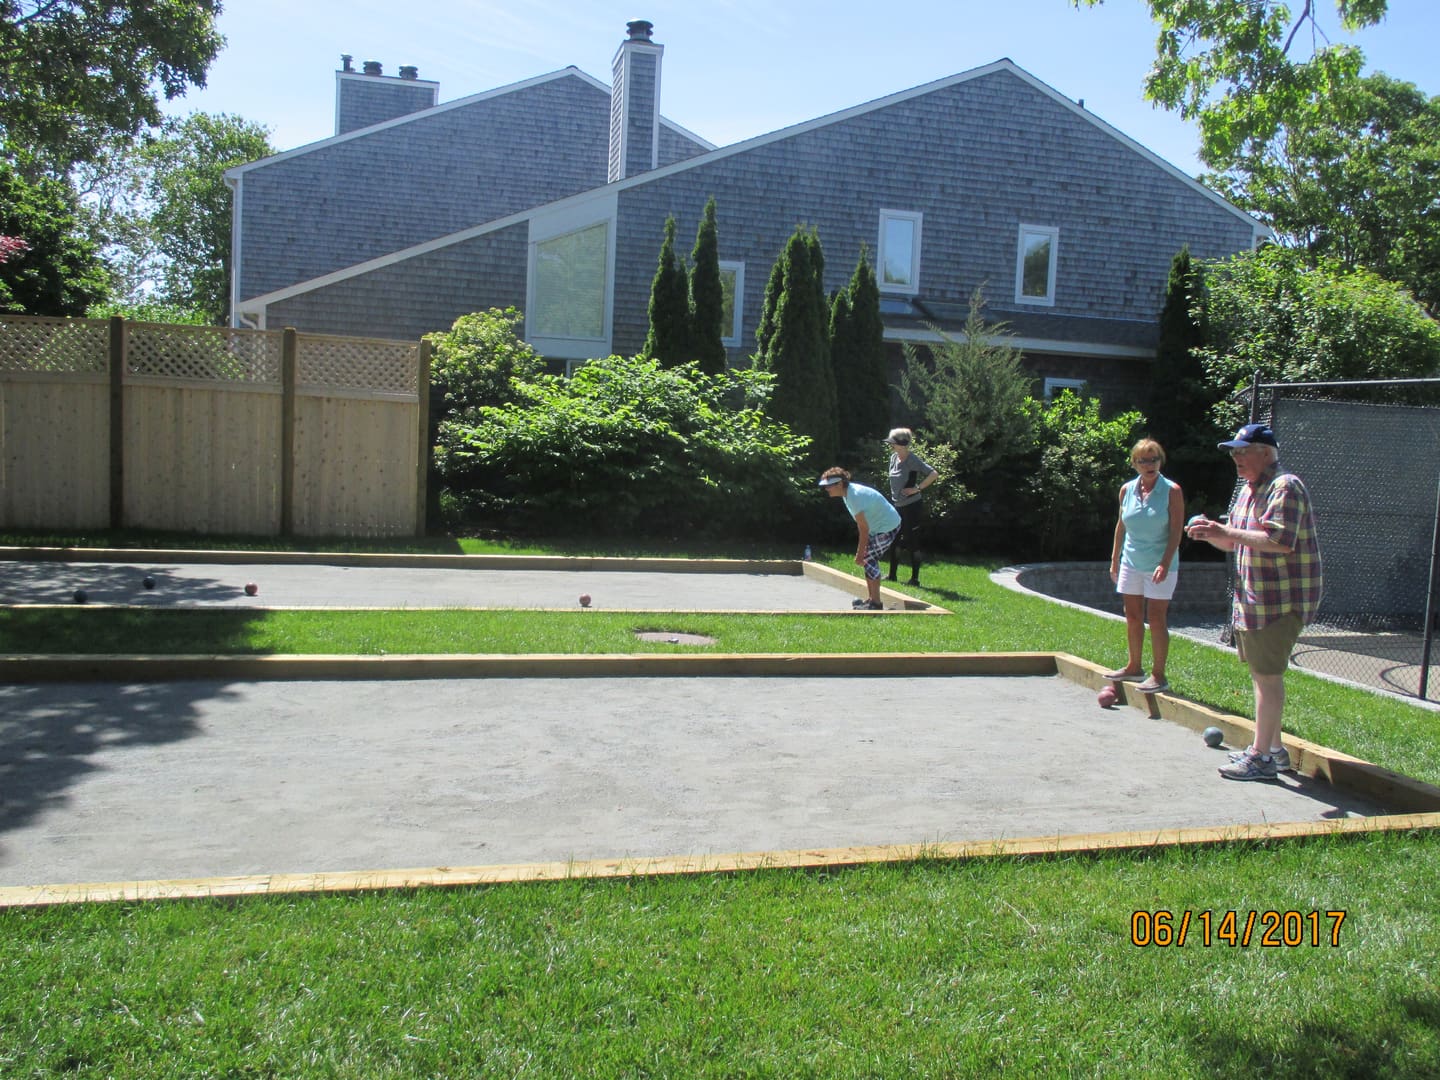 A group of people playing bocce ball in the yard.